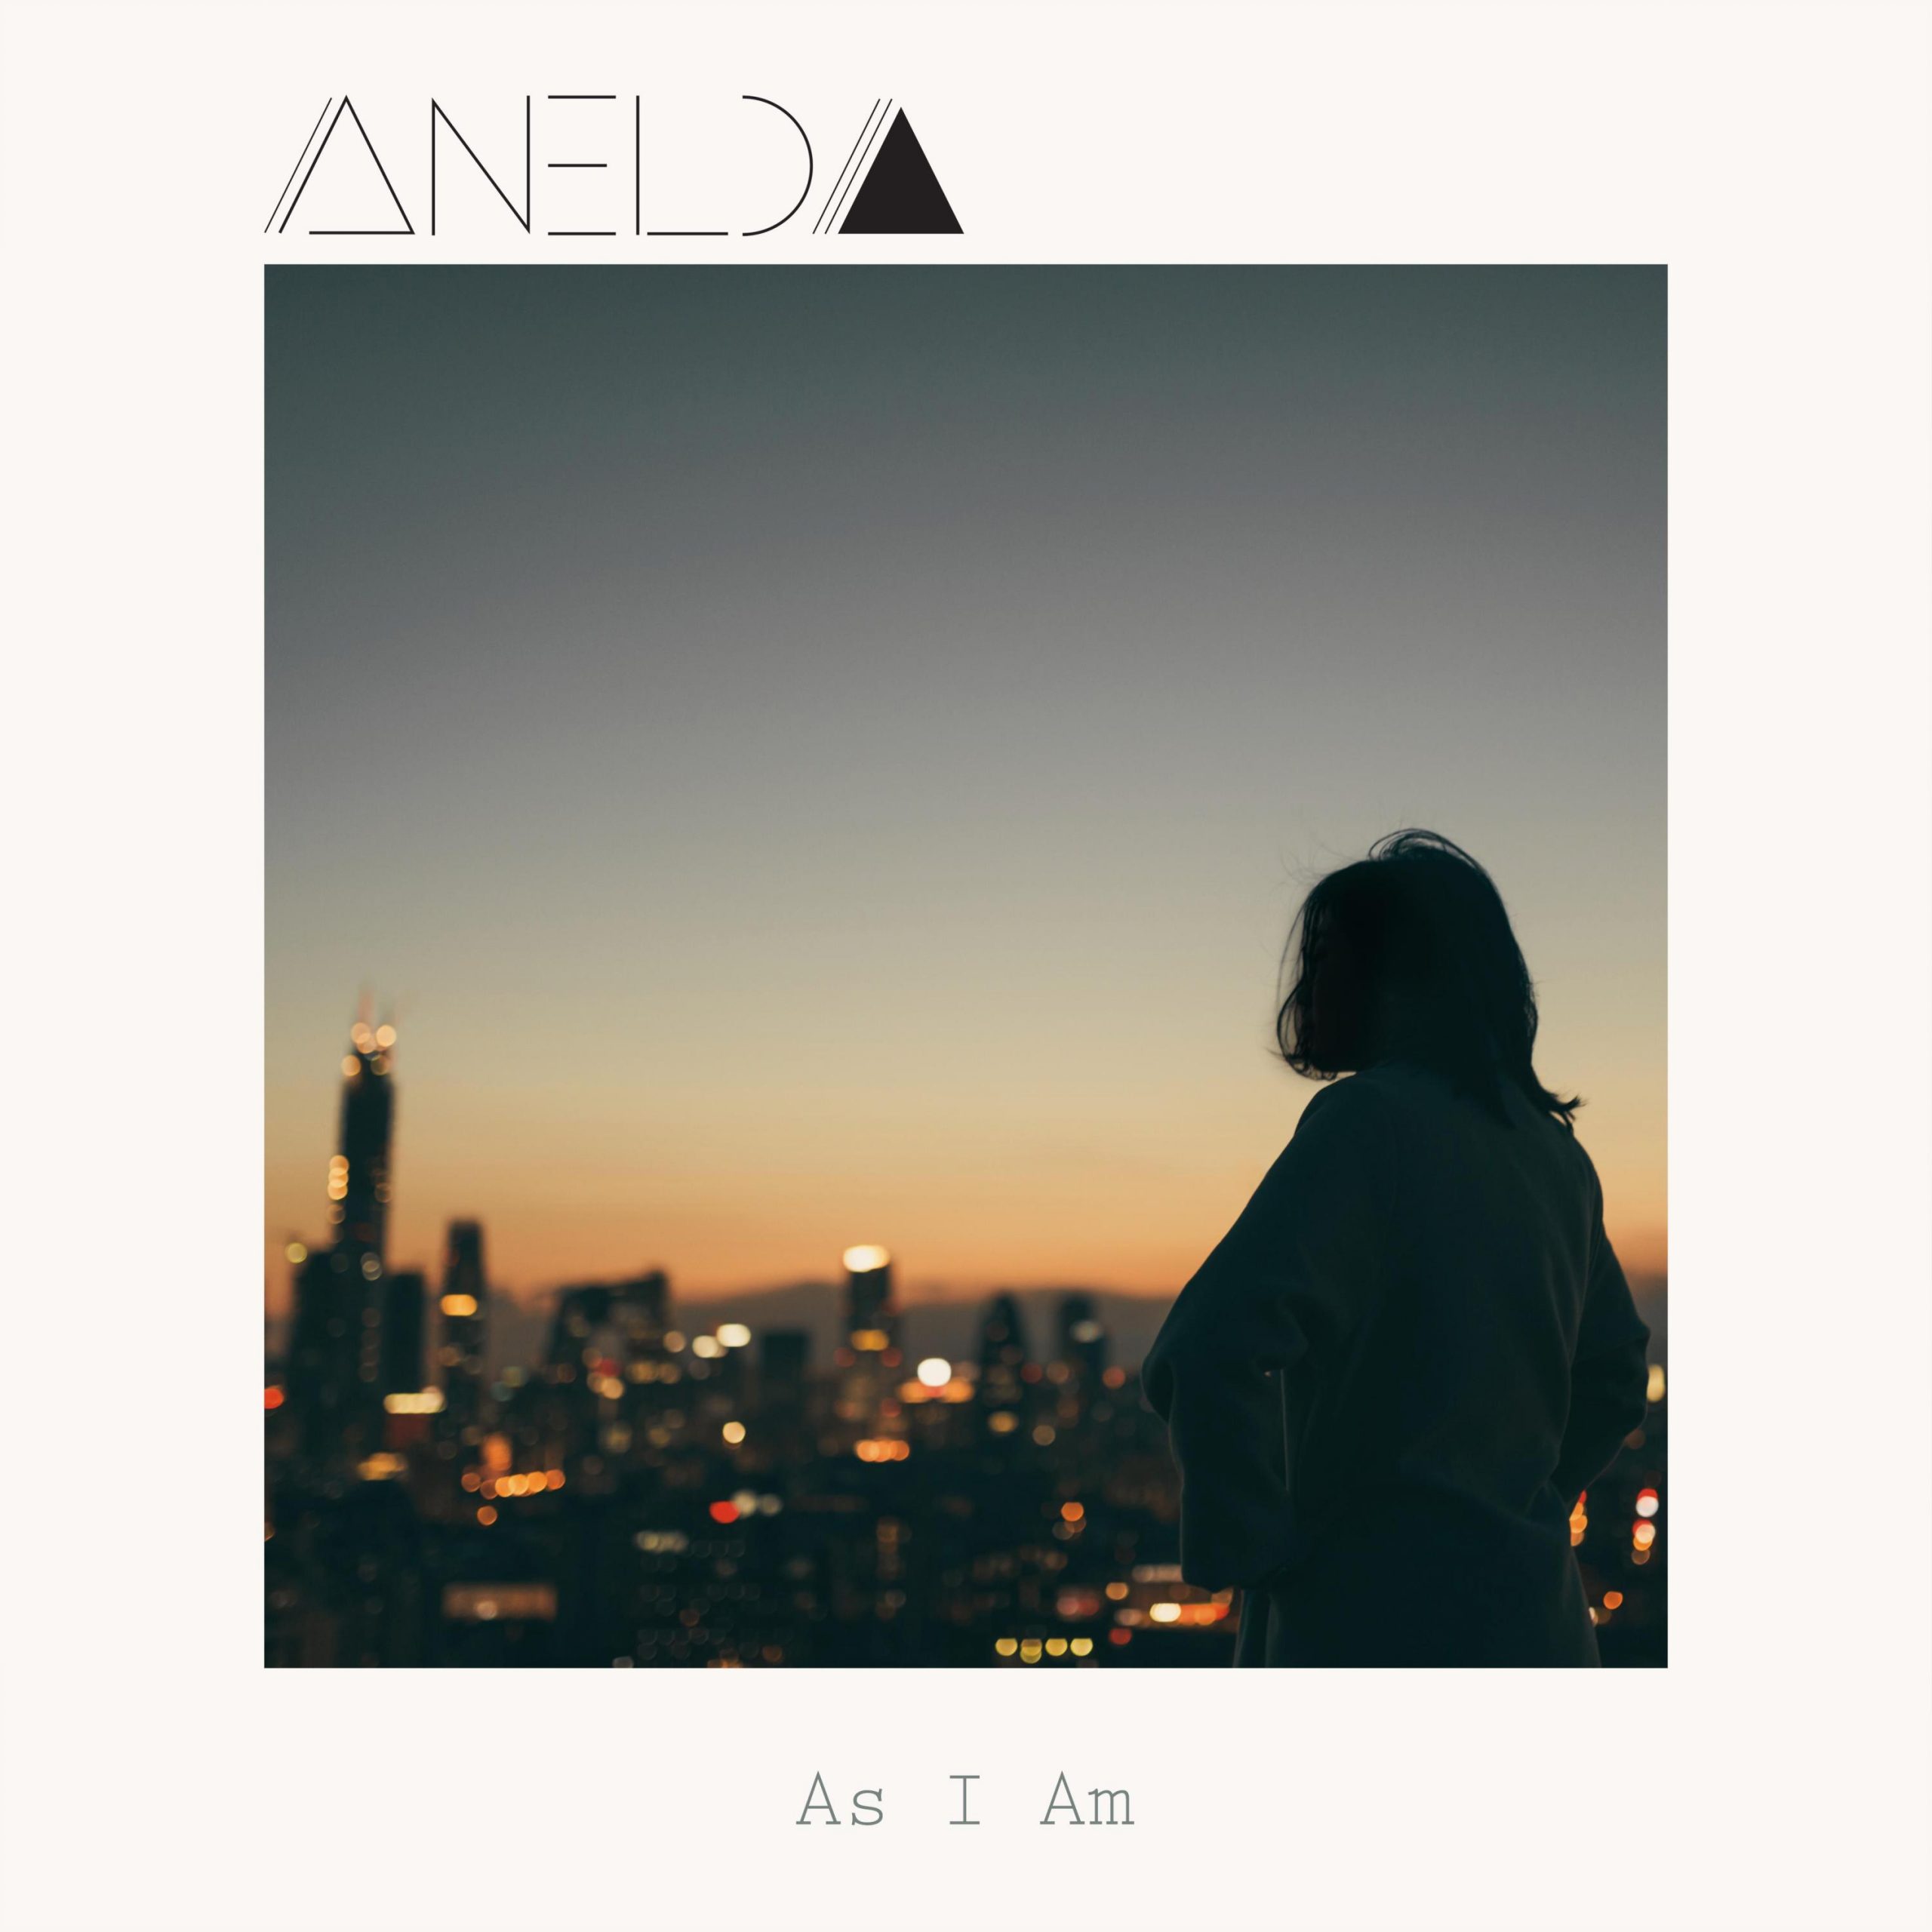 As I Am - song by Anelda